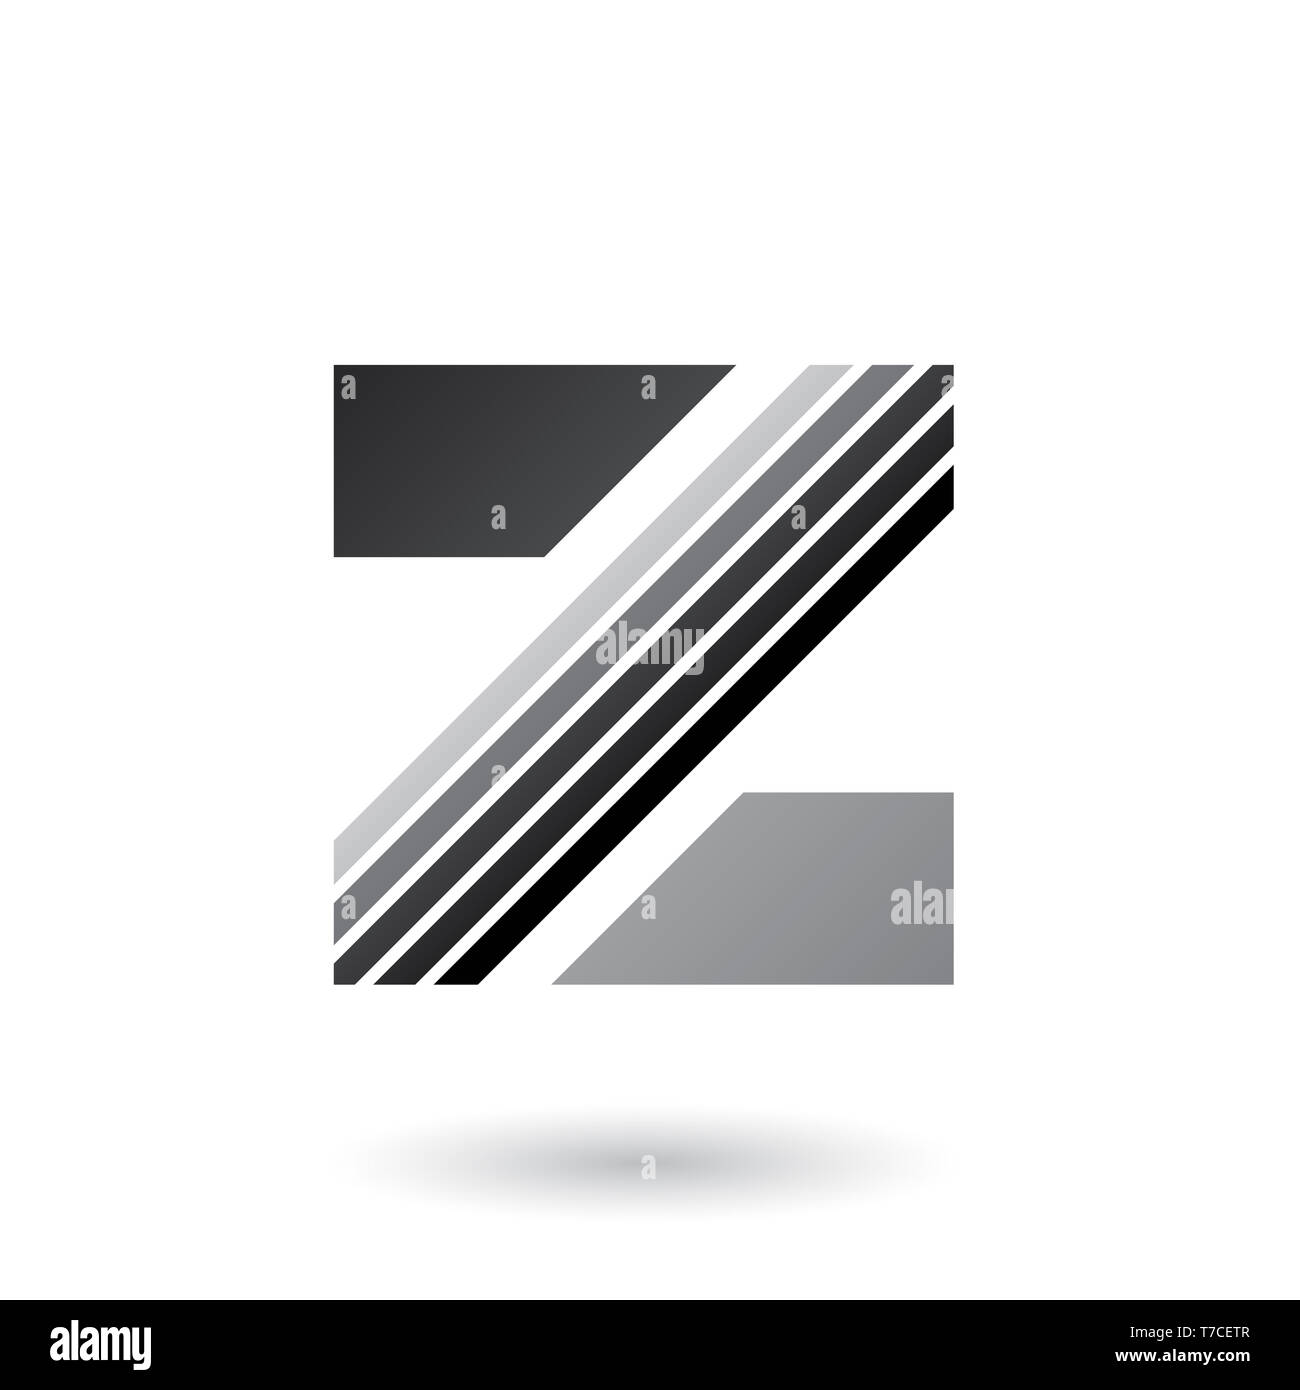 Vector Illustration of Grey Letter Z with Thick Diagonal Stripes isolated on a White Background Stock Photo